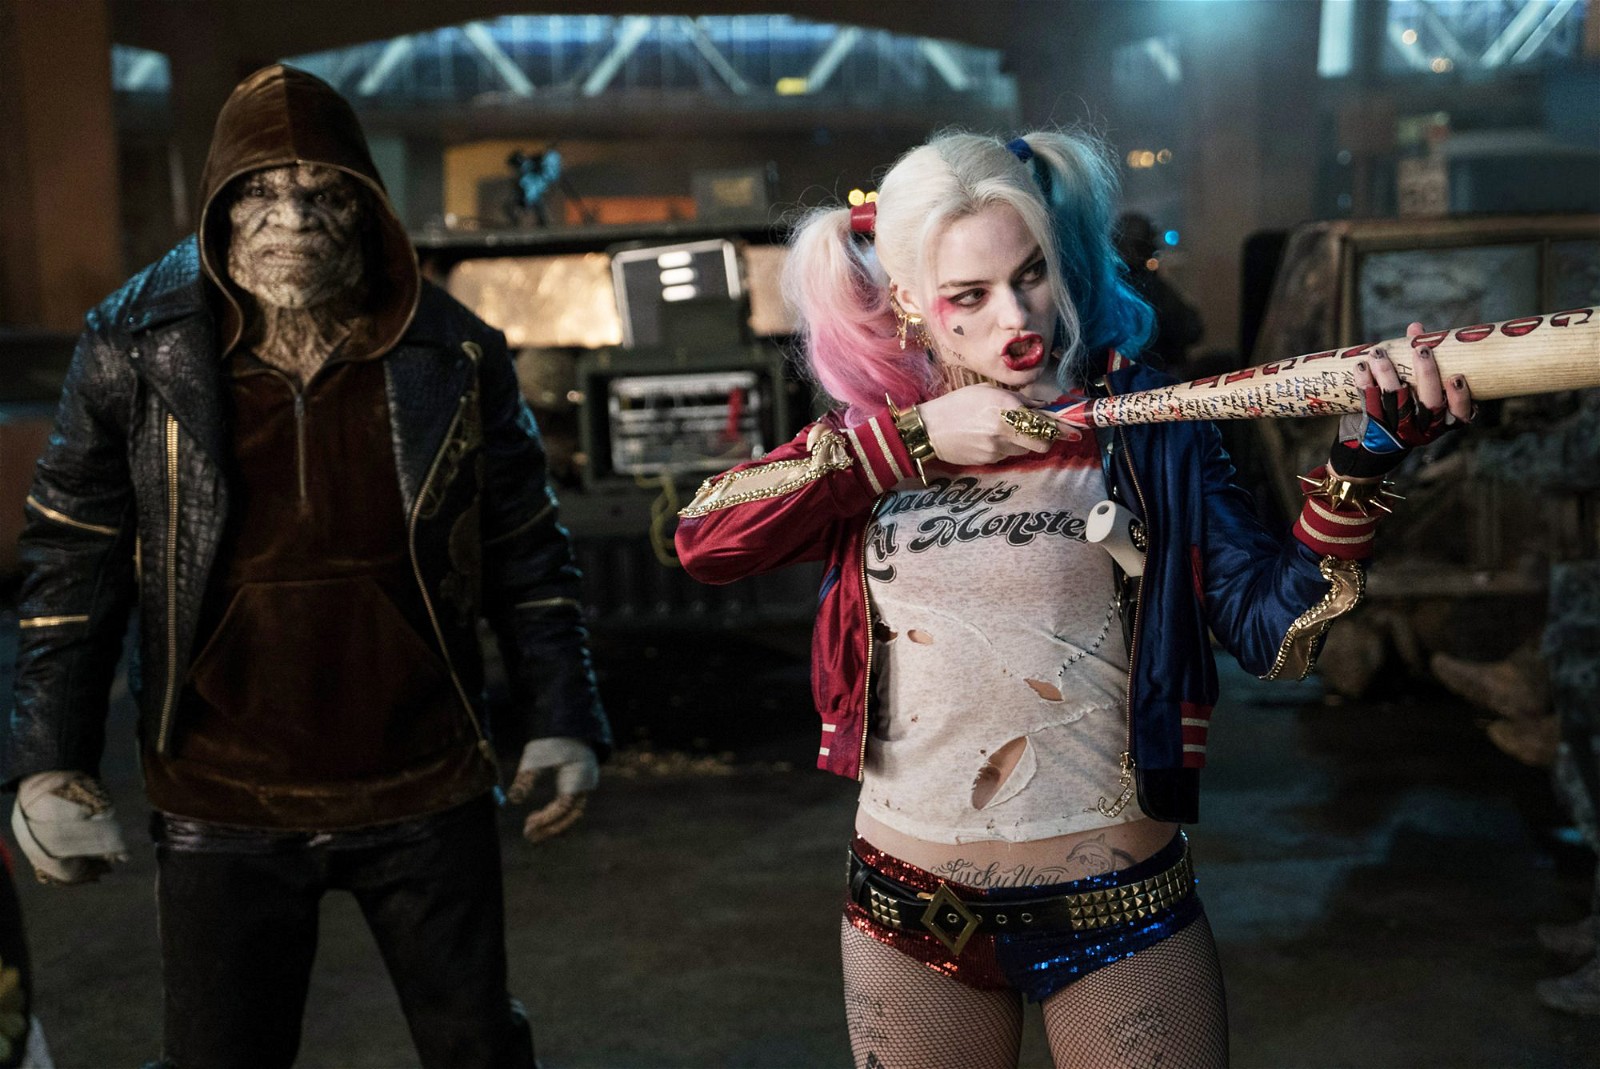 Margot Robbie as Harley Quinn in Suicide Squad (2016).